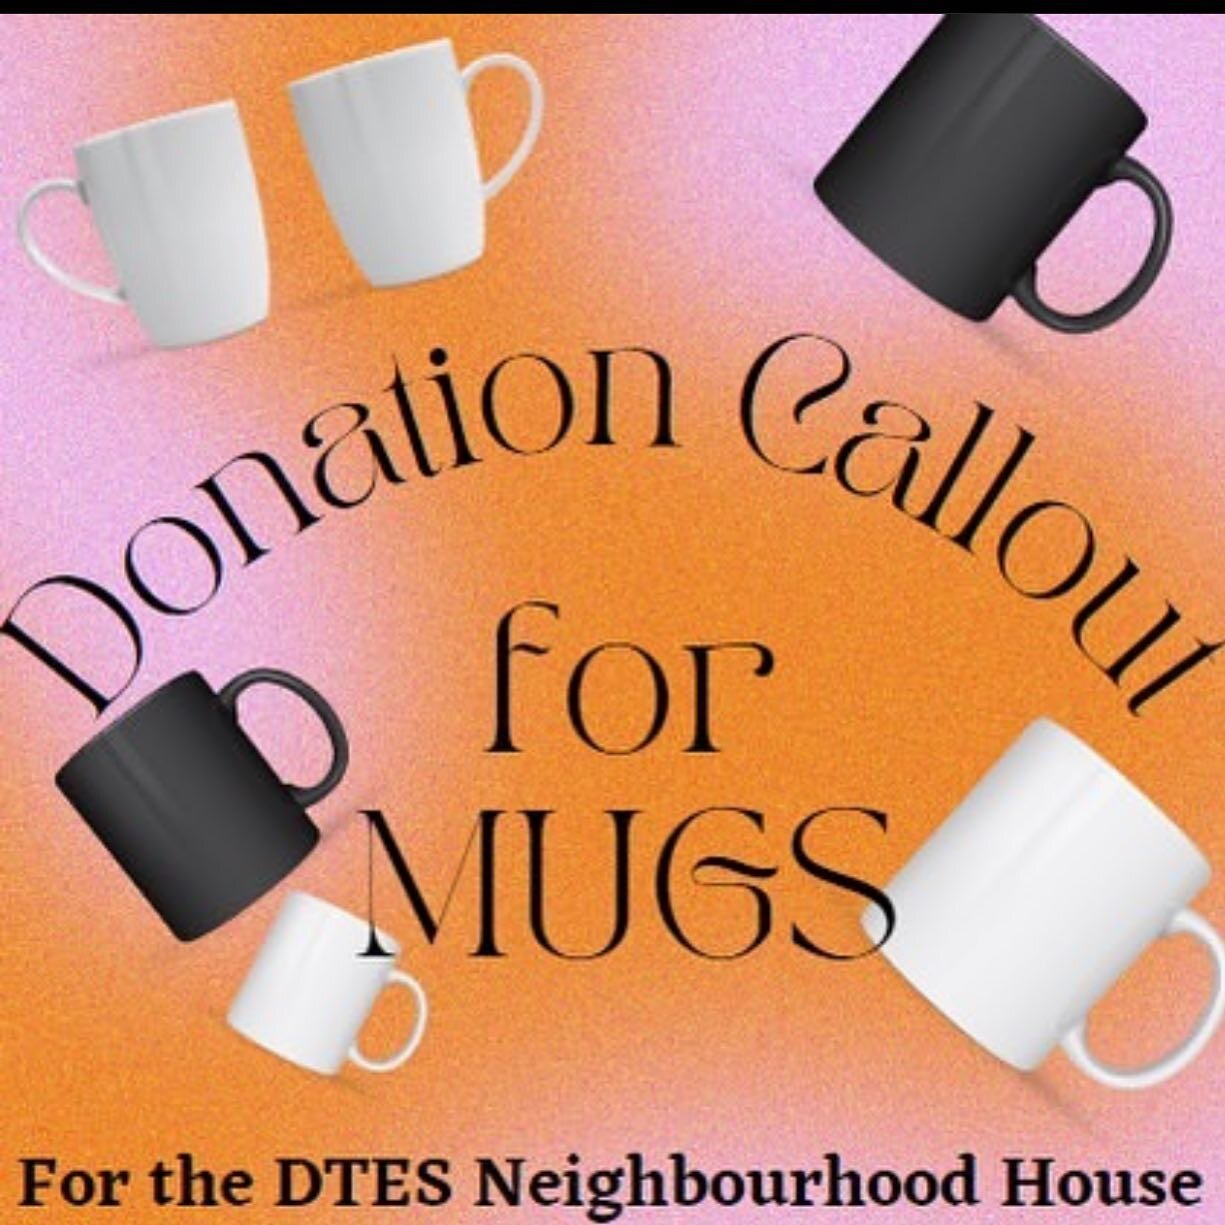 Callout for Mug donations! Spread the word 💛

Donations can be dropped off during Community Drop-in hours: MON-WED 10am-2pm at the Neighbourhood House (573 E Hastings St.). Or reach out to us here on instagram to find another time that works better 